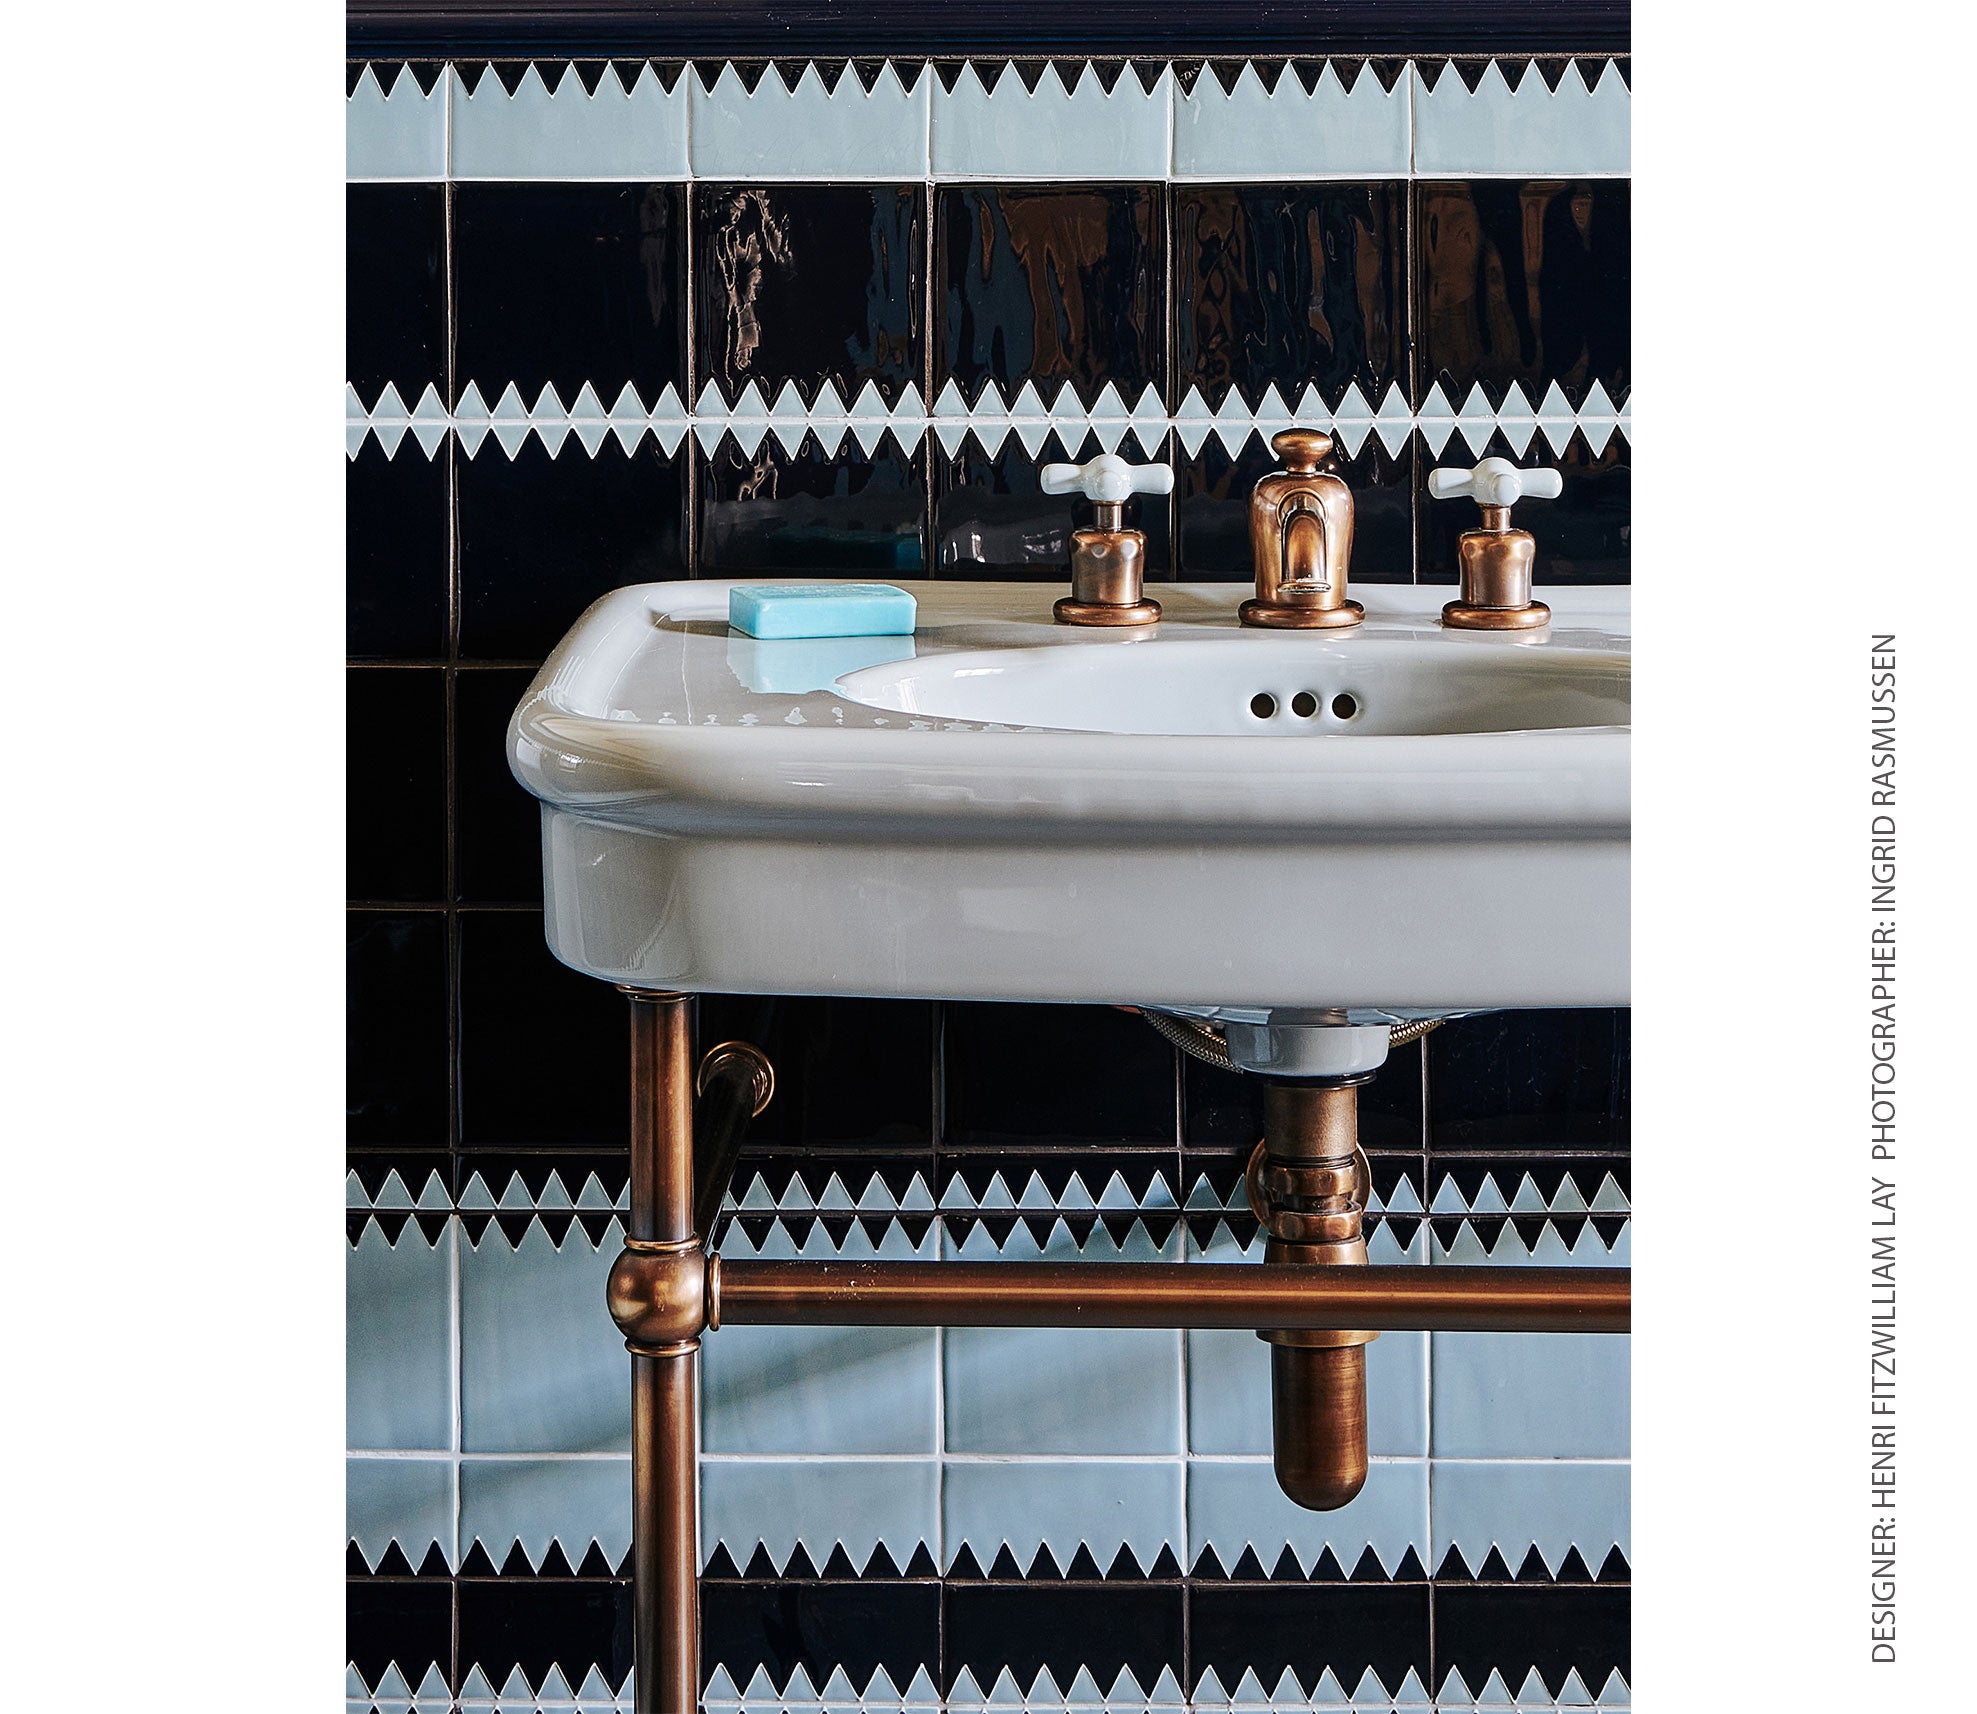 Hanley Tube Lined Decorative Tiles Product Image 4